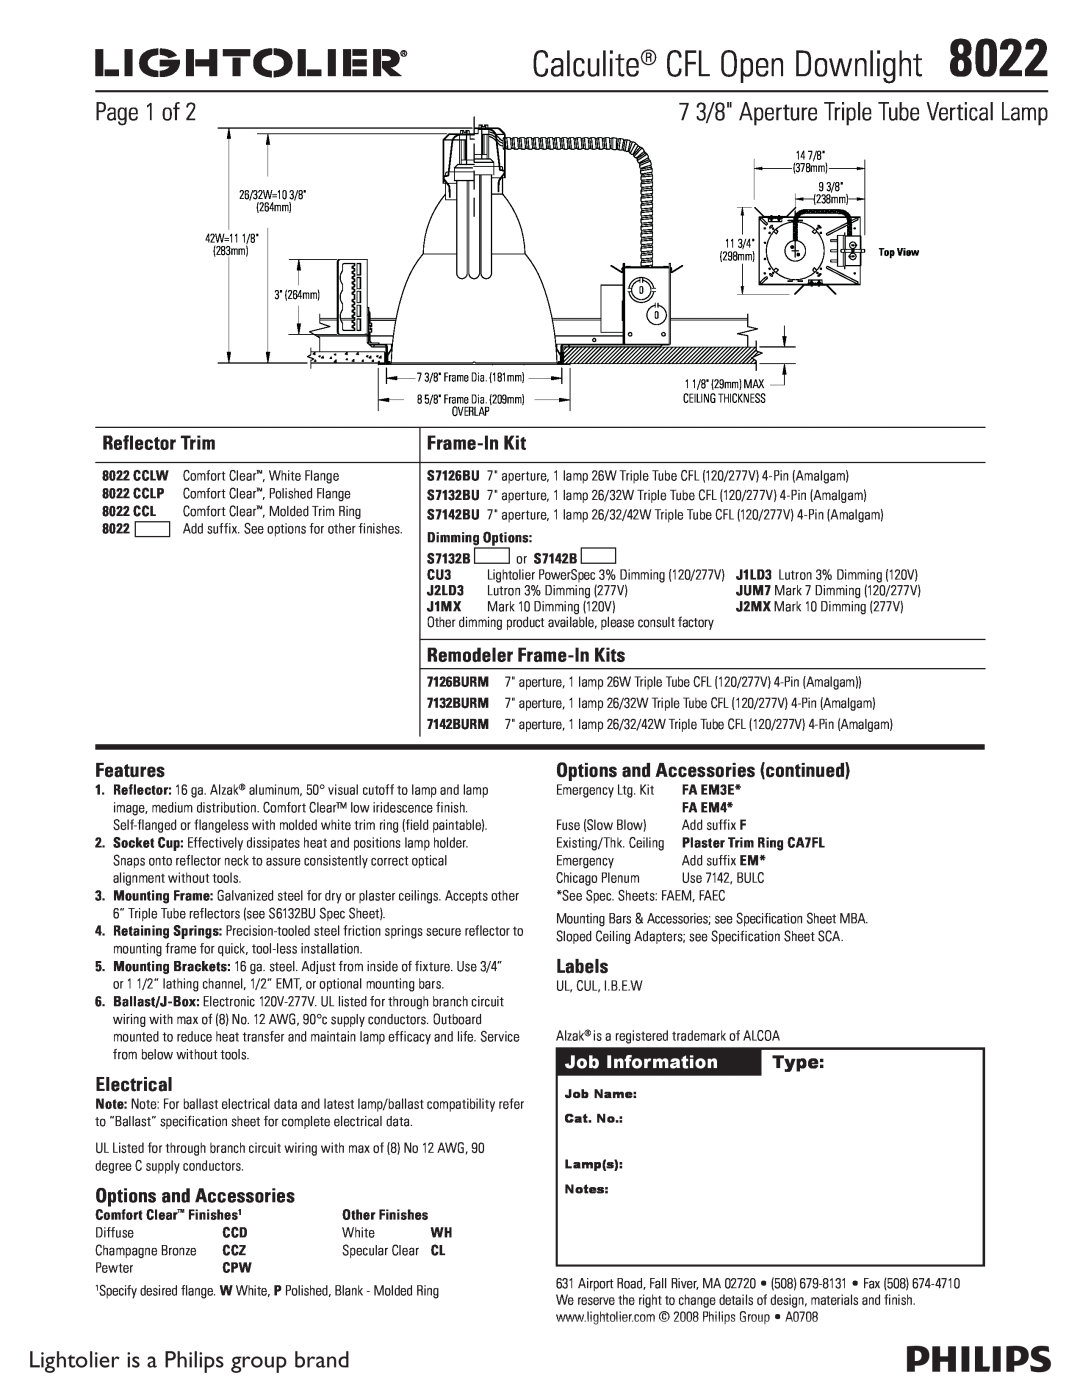 Lightolier specifications Calculite CFL Open Downlight8022, Page 1 of, Lightolier is a Philips group brand, Frame-InKit 